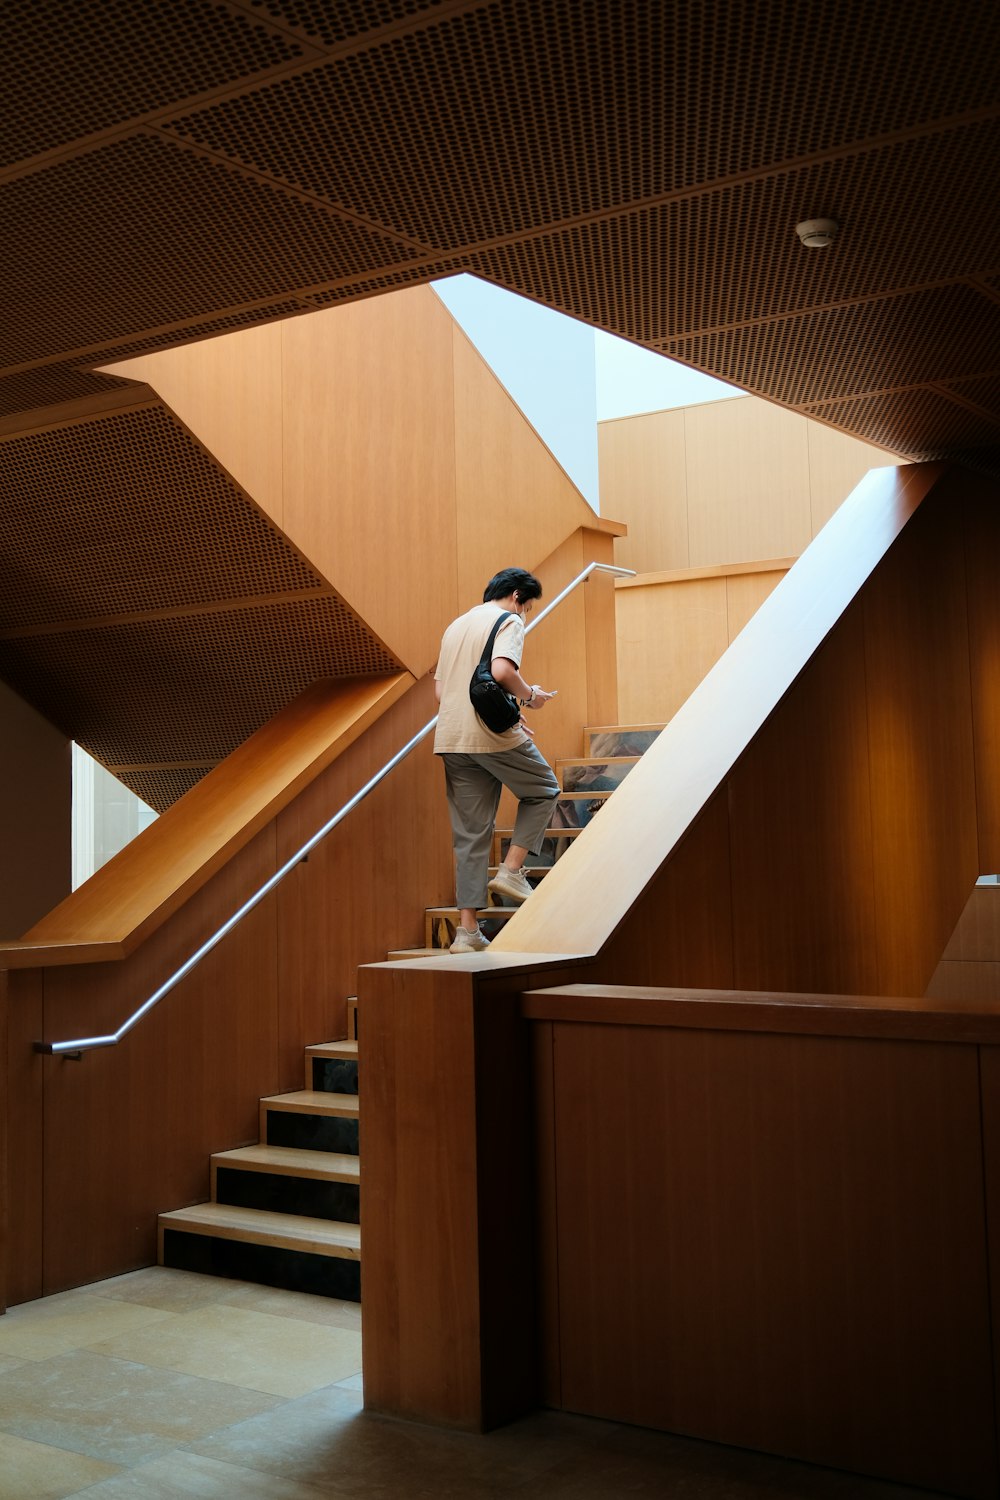 a person riding a skateboard down a flight of stairs